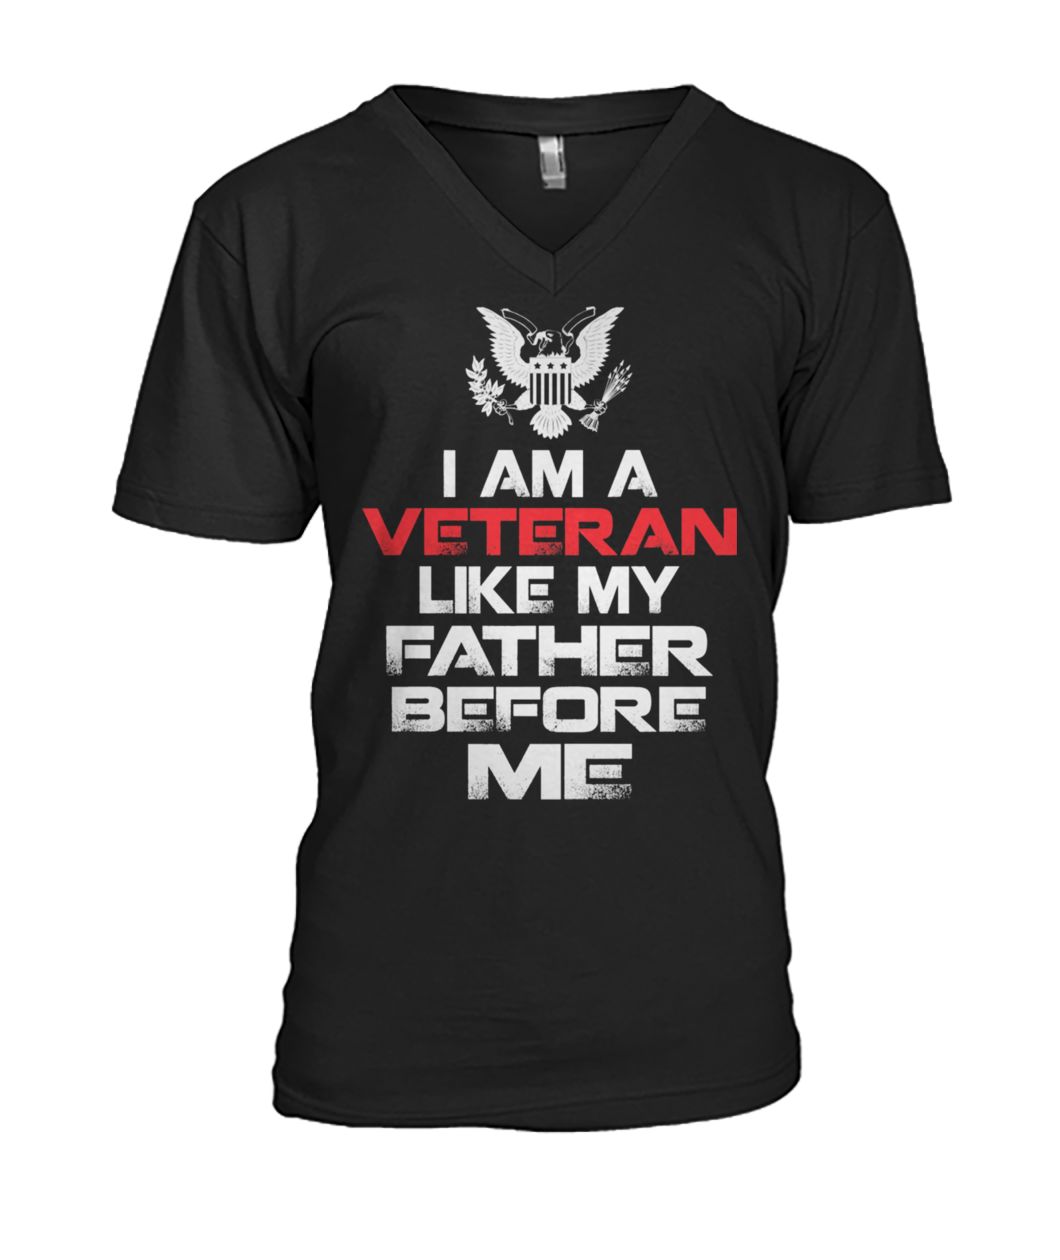 I am a veteran like my father before me mens v-neck